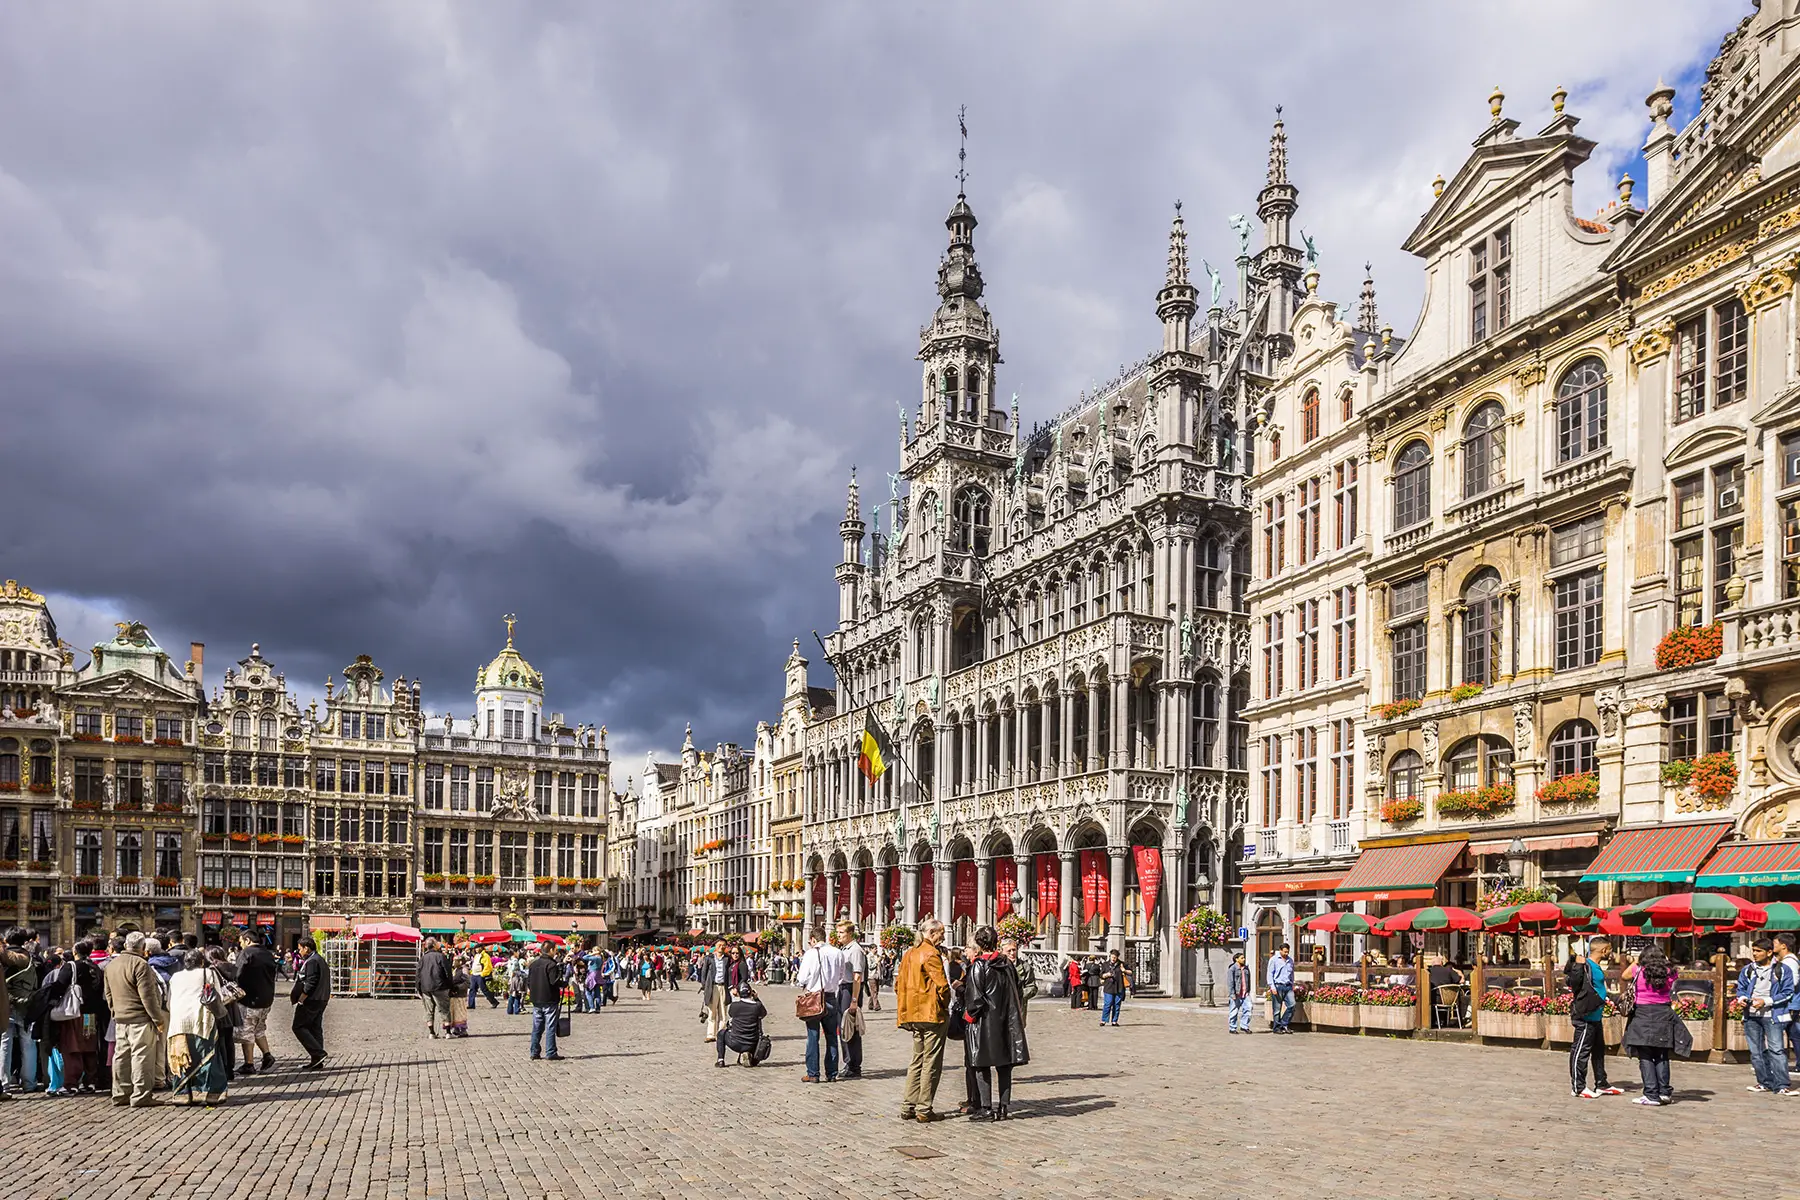 The Grand Place with the historical buildings and the elaborately decorated 17th-century guildhalls (or guild houses) of the Grand Place like Le Pigeon, Le Marchand d'or and the King's House or Breadhouse